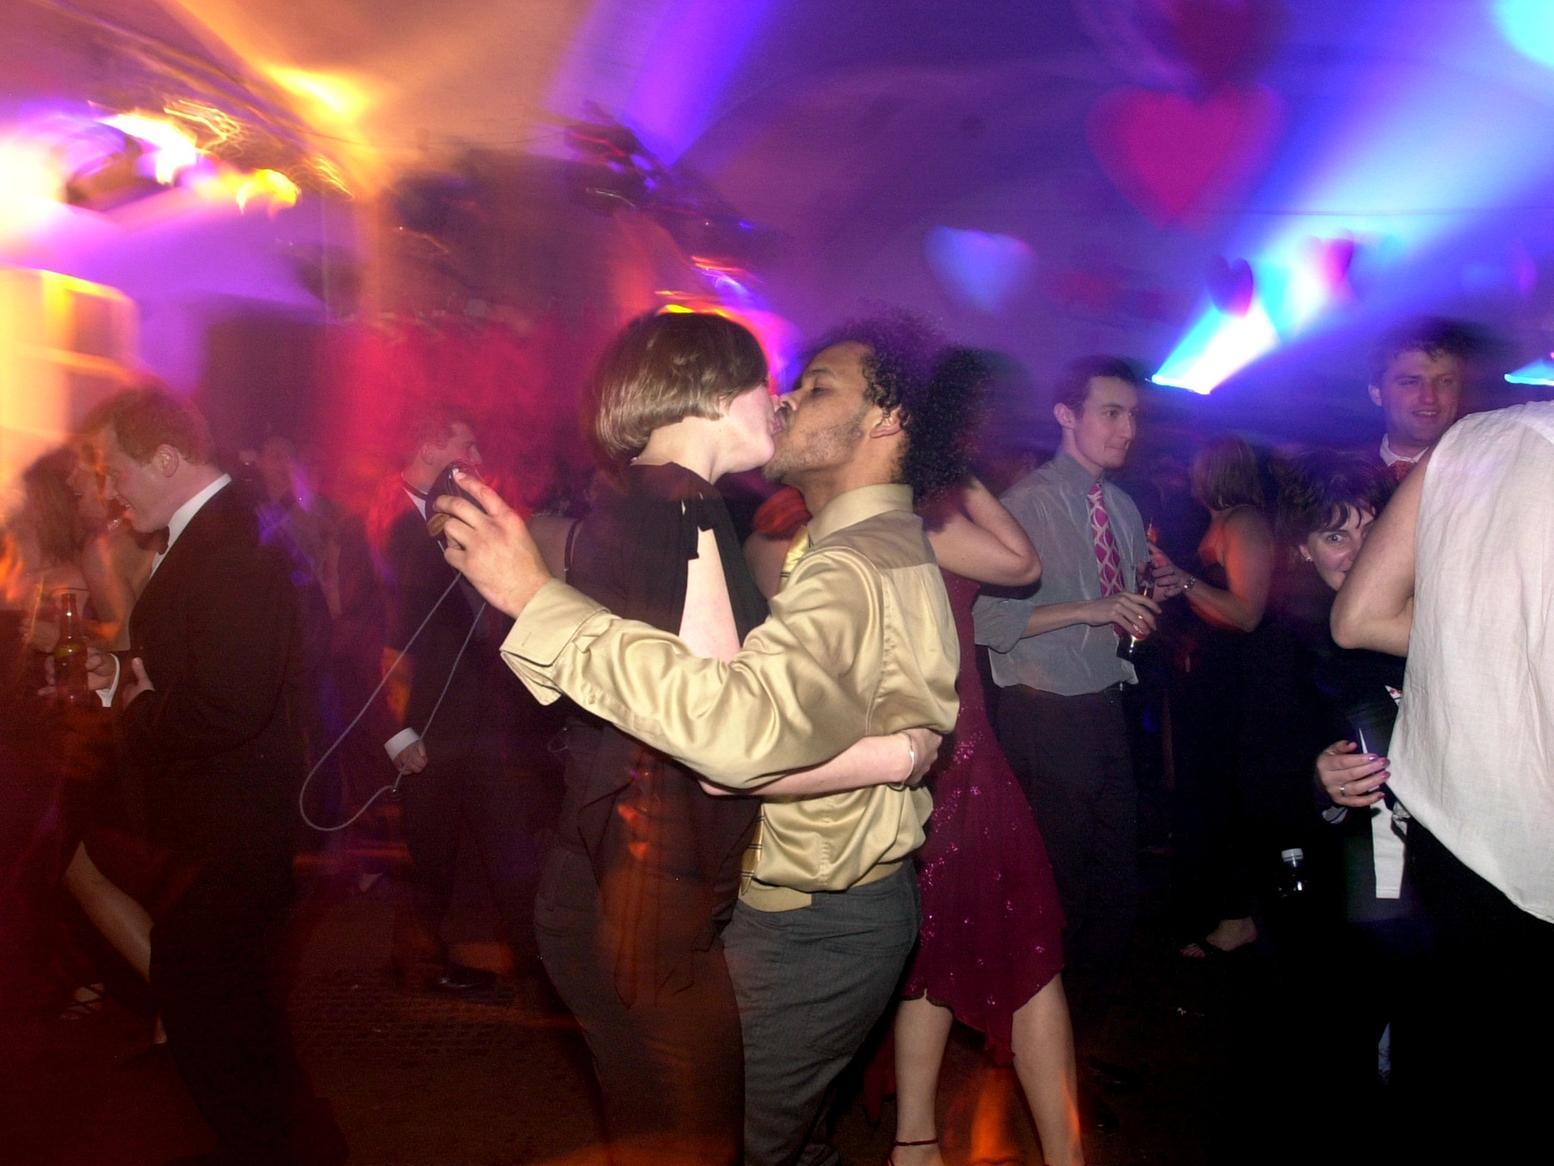 Love was in the air for these two singletons on the dancefloor.